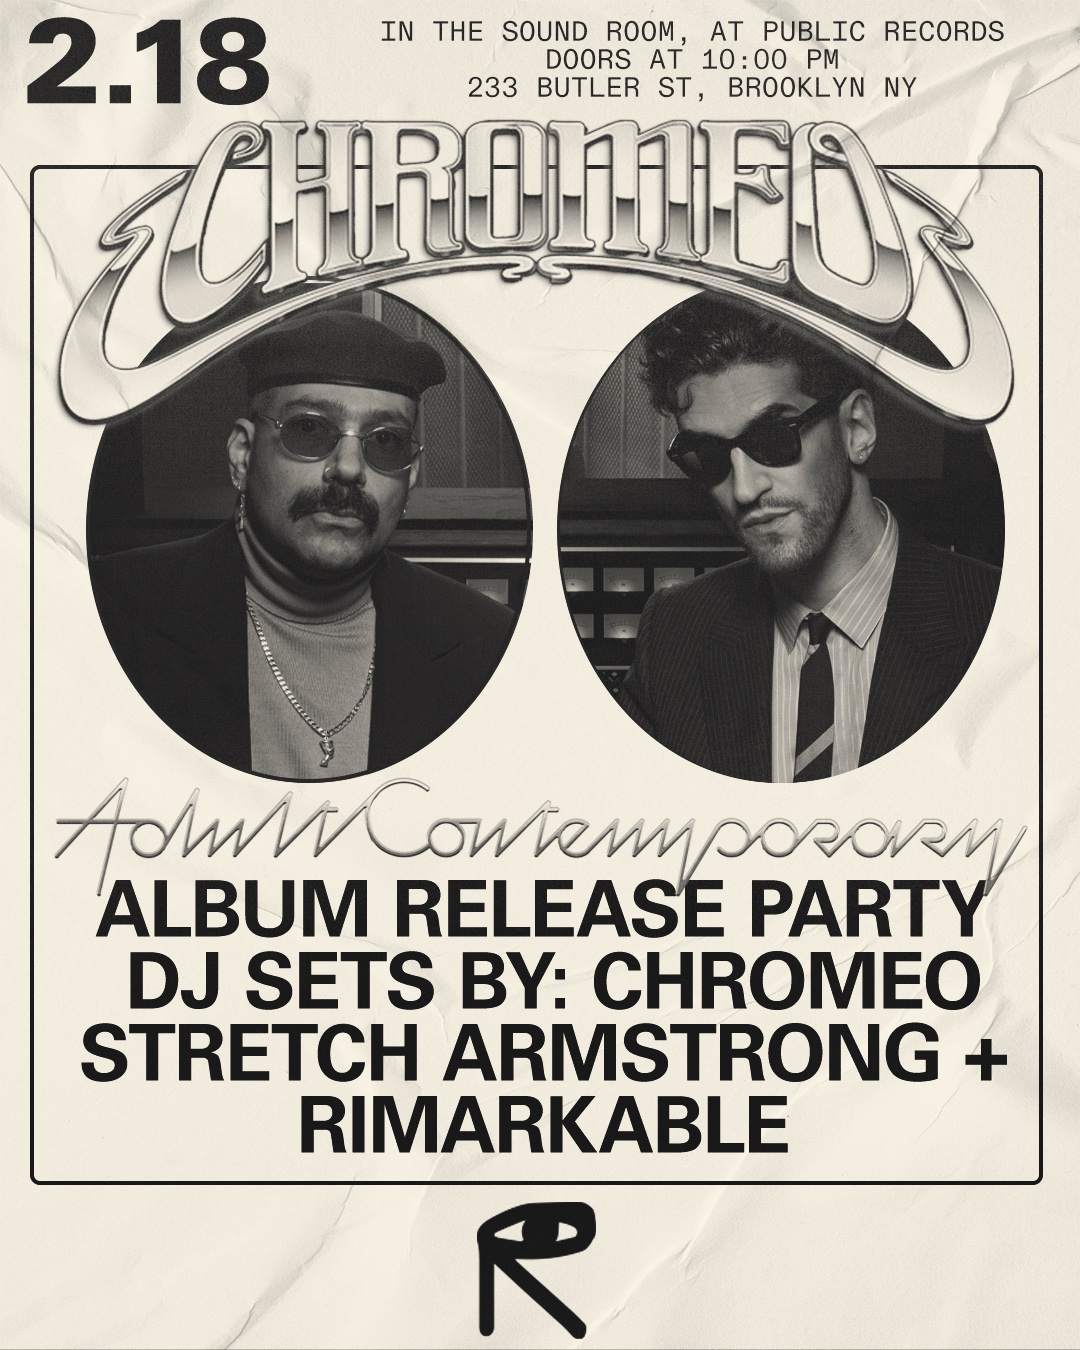 Chromeo Adult Contemporary Release Party: DJ Sets by Chromeo + Stretch Armstrong + Rimarkable - Página frontal